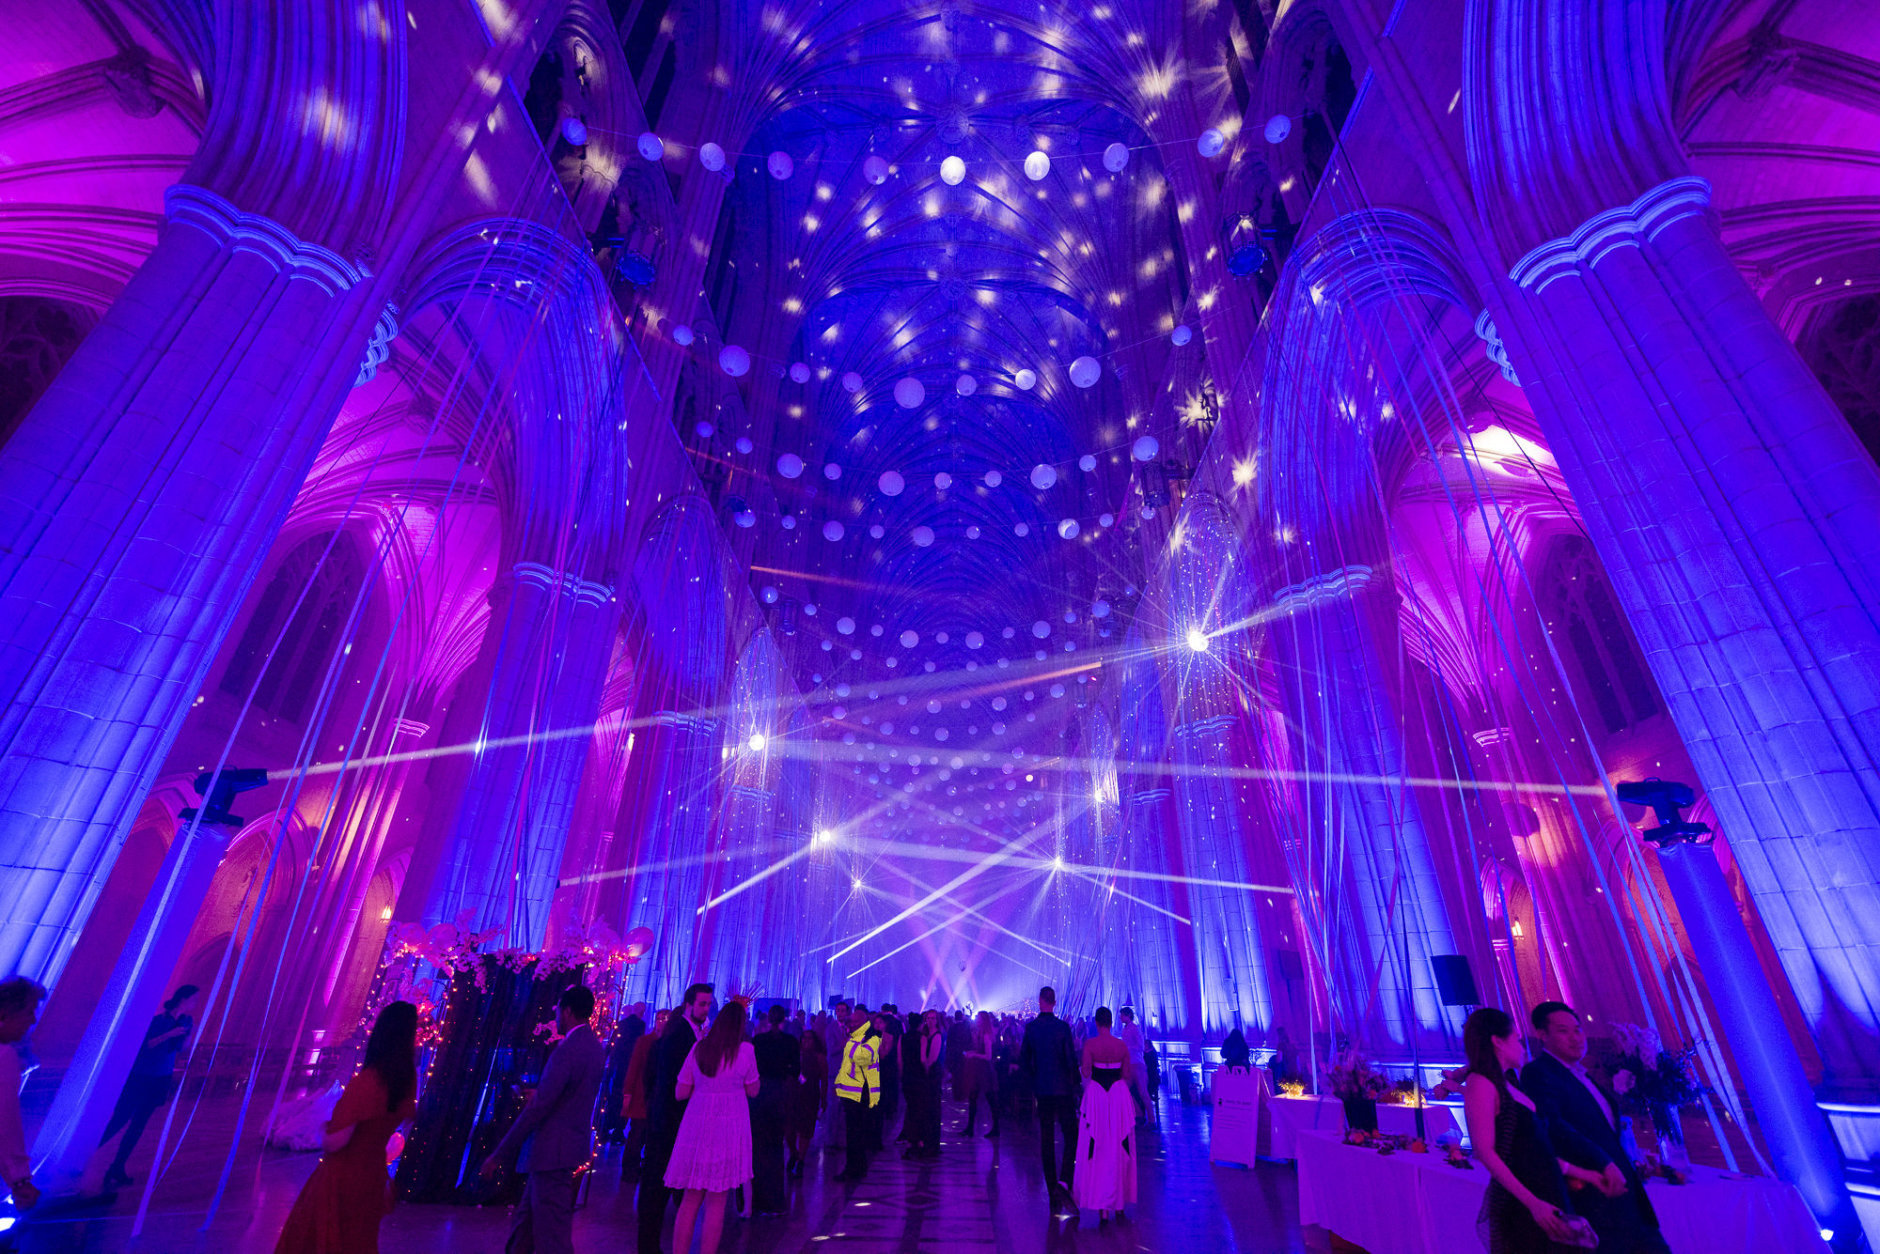 Adults gathered Thursday night inside a colorfully lit cathedral for a "Second Chance Prom." (Courtesy Washington National Cathedral)